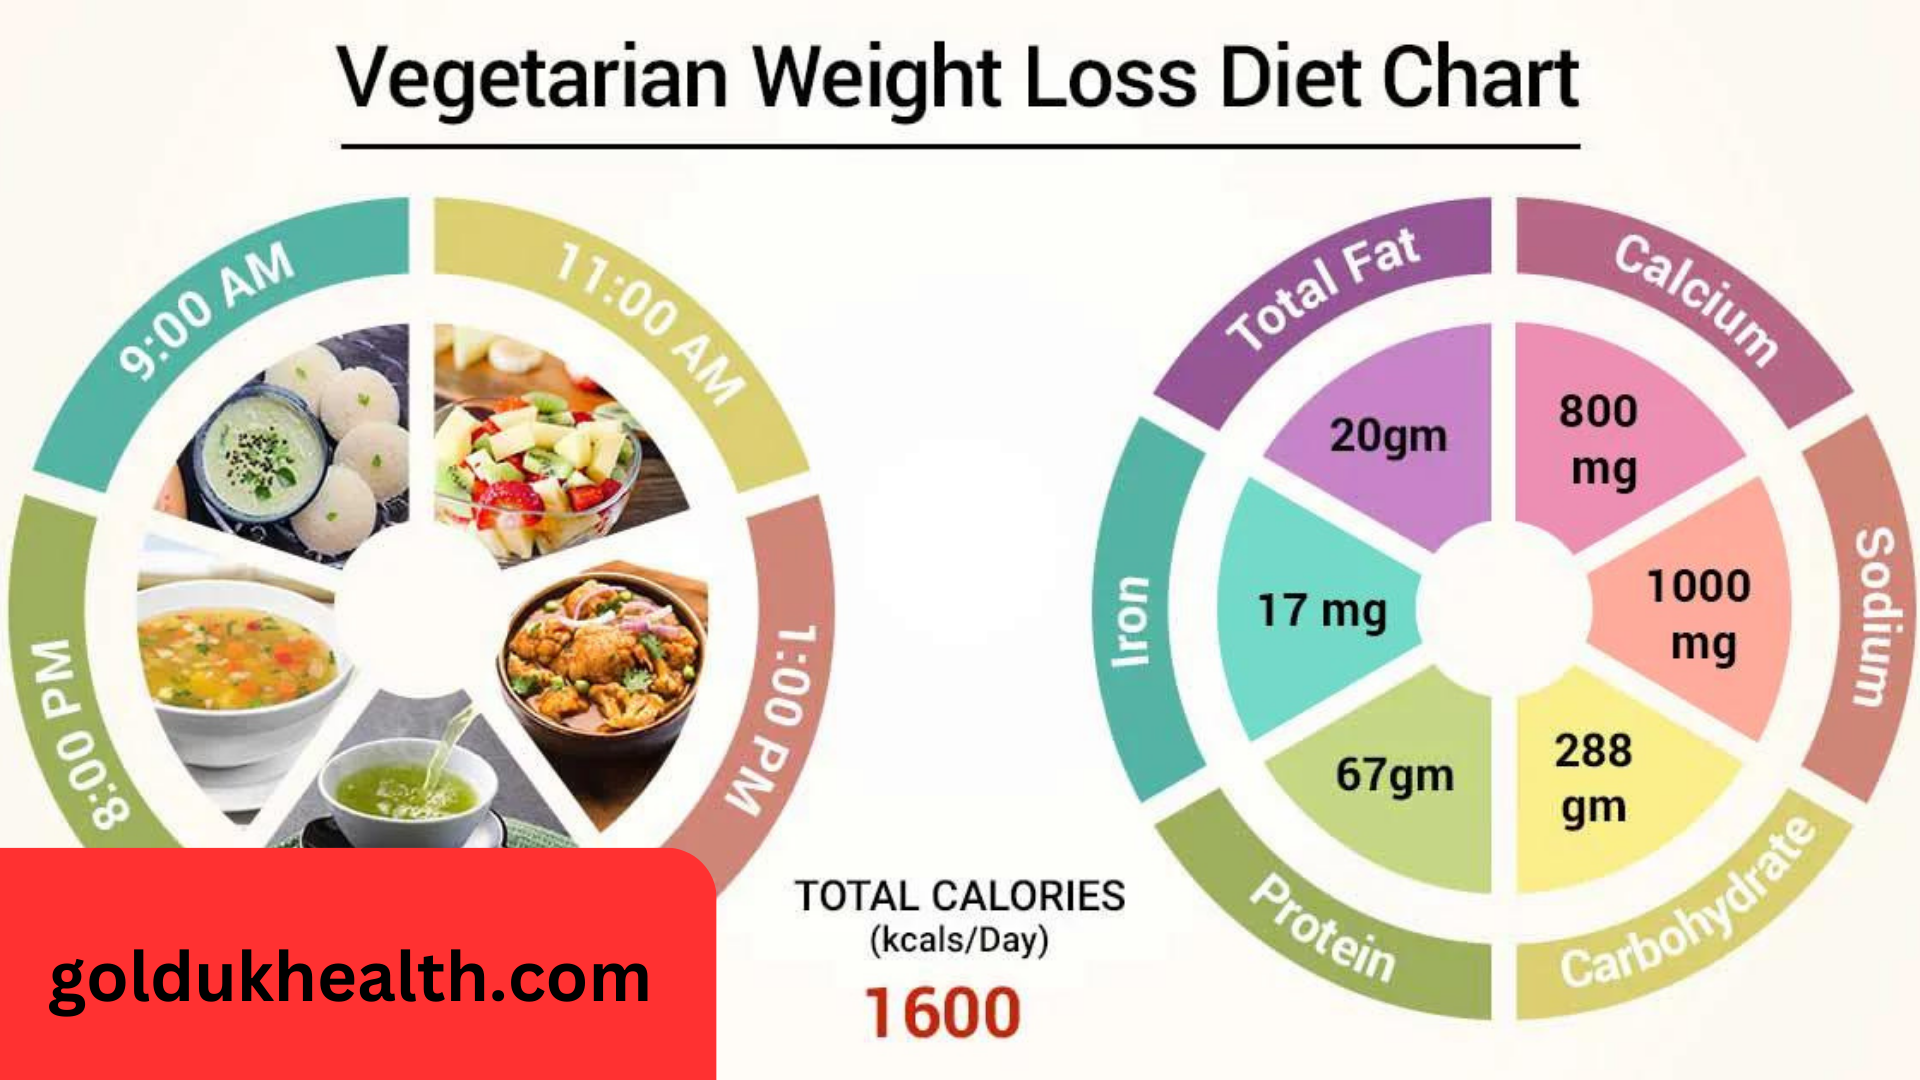 Diet Plan For Losing Weight